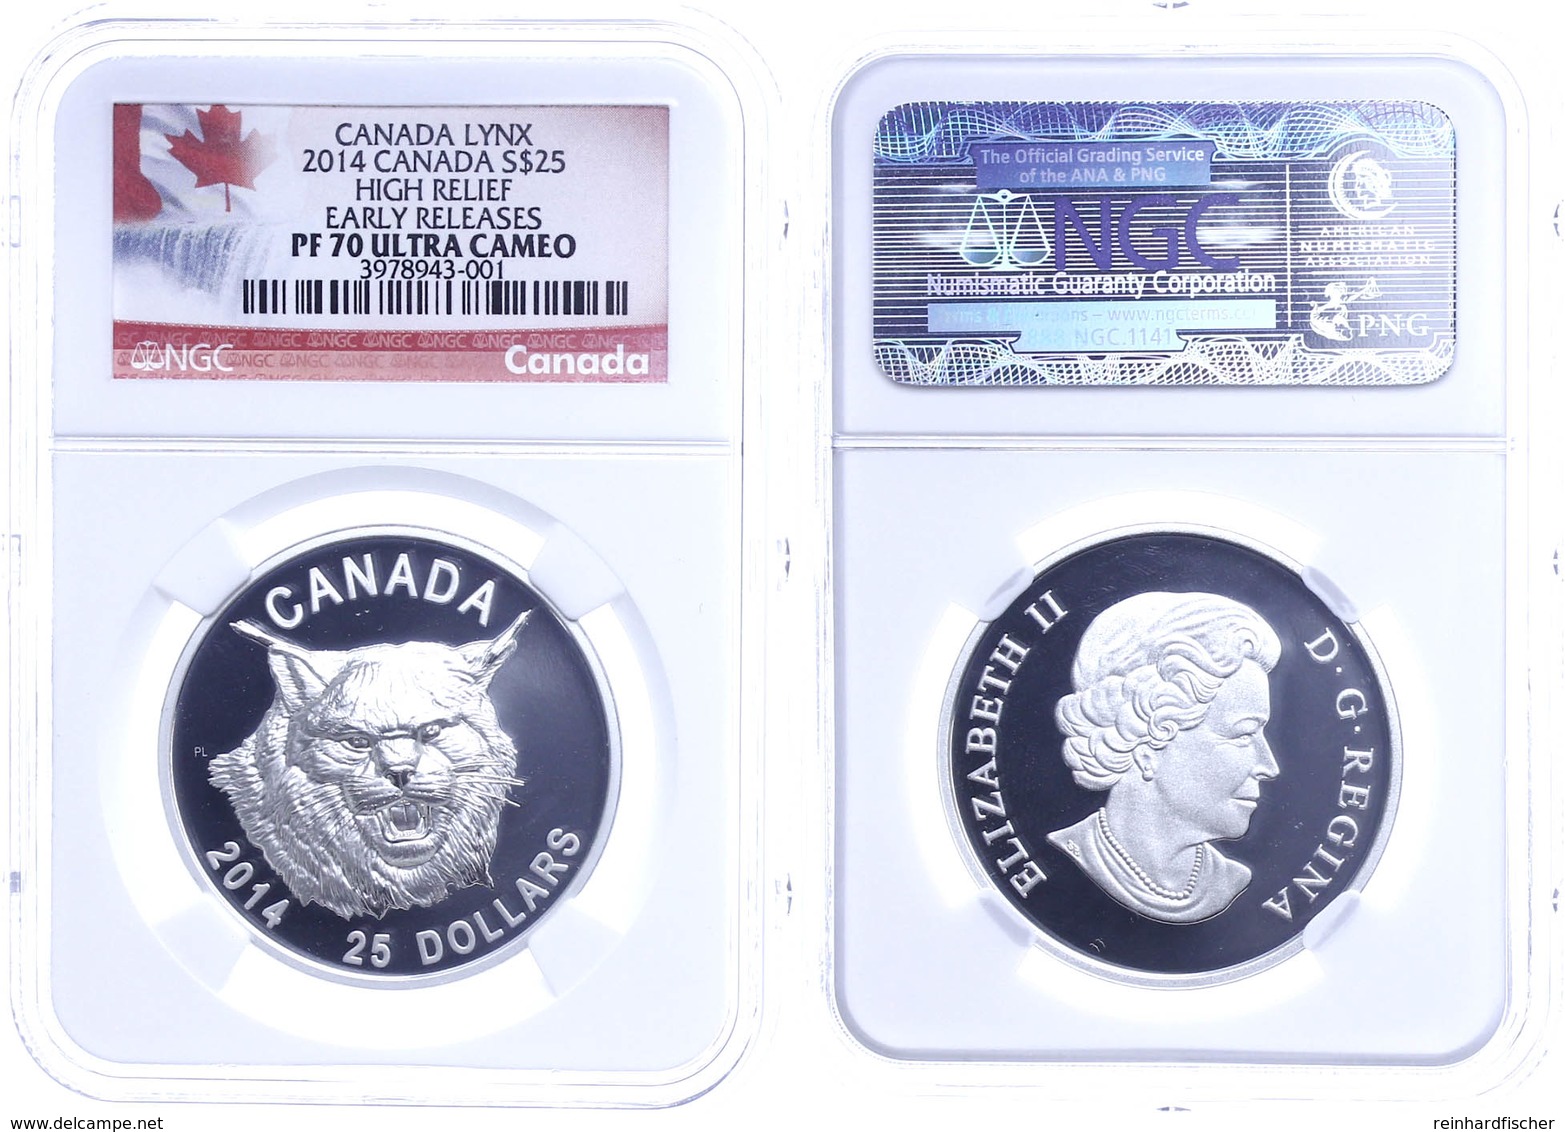 25 Dollars, 2014, Luchs, In Slab Der NGC Mit Der Bewertung PF70 Ultra Cameo, High Relief, Early Releases, Flag Label. - Canada